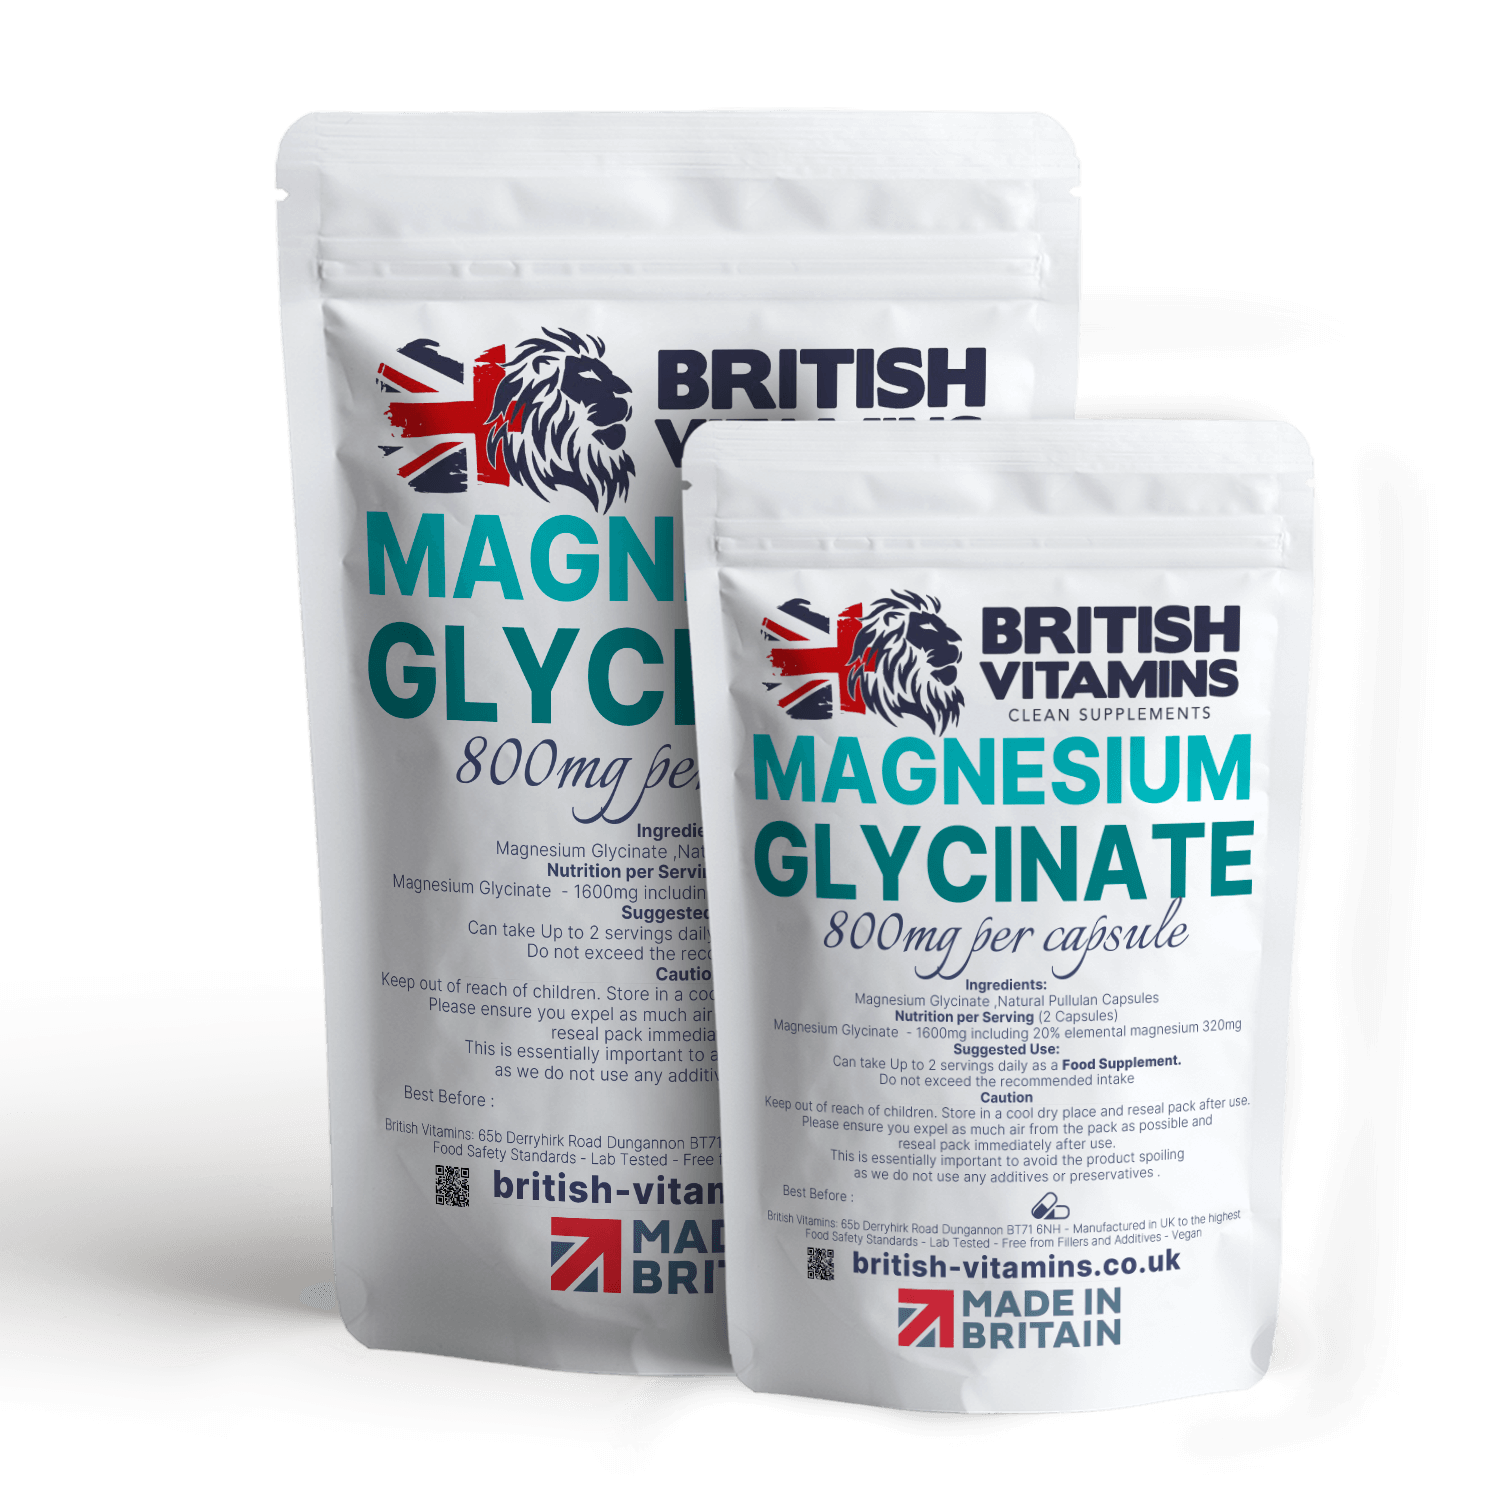 Magnesium Glycinate contains 20% elemental magnesium Health & Beauty:Vitamins & Lifestyle Supplements:Sports Supplements:Protein Shakes & Bodybuilding British Vitamins 5 capsules  